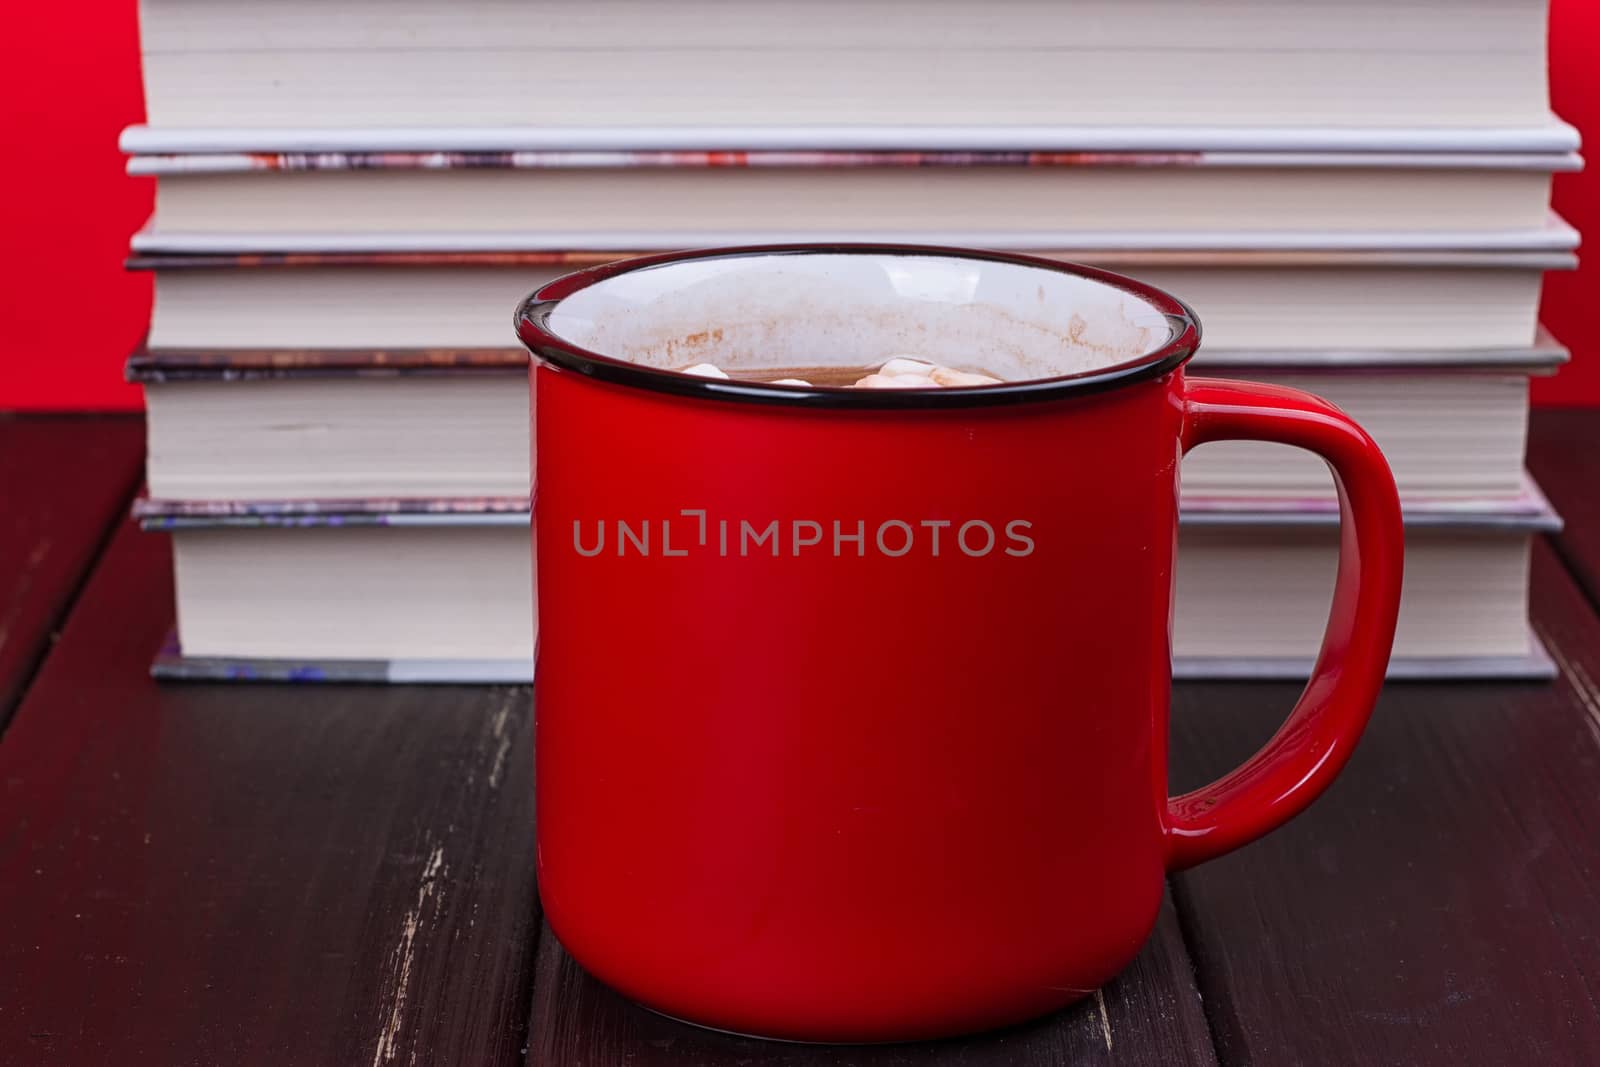 Old vintage books and a red mug